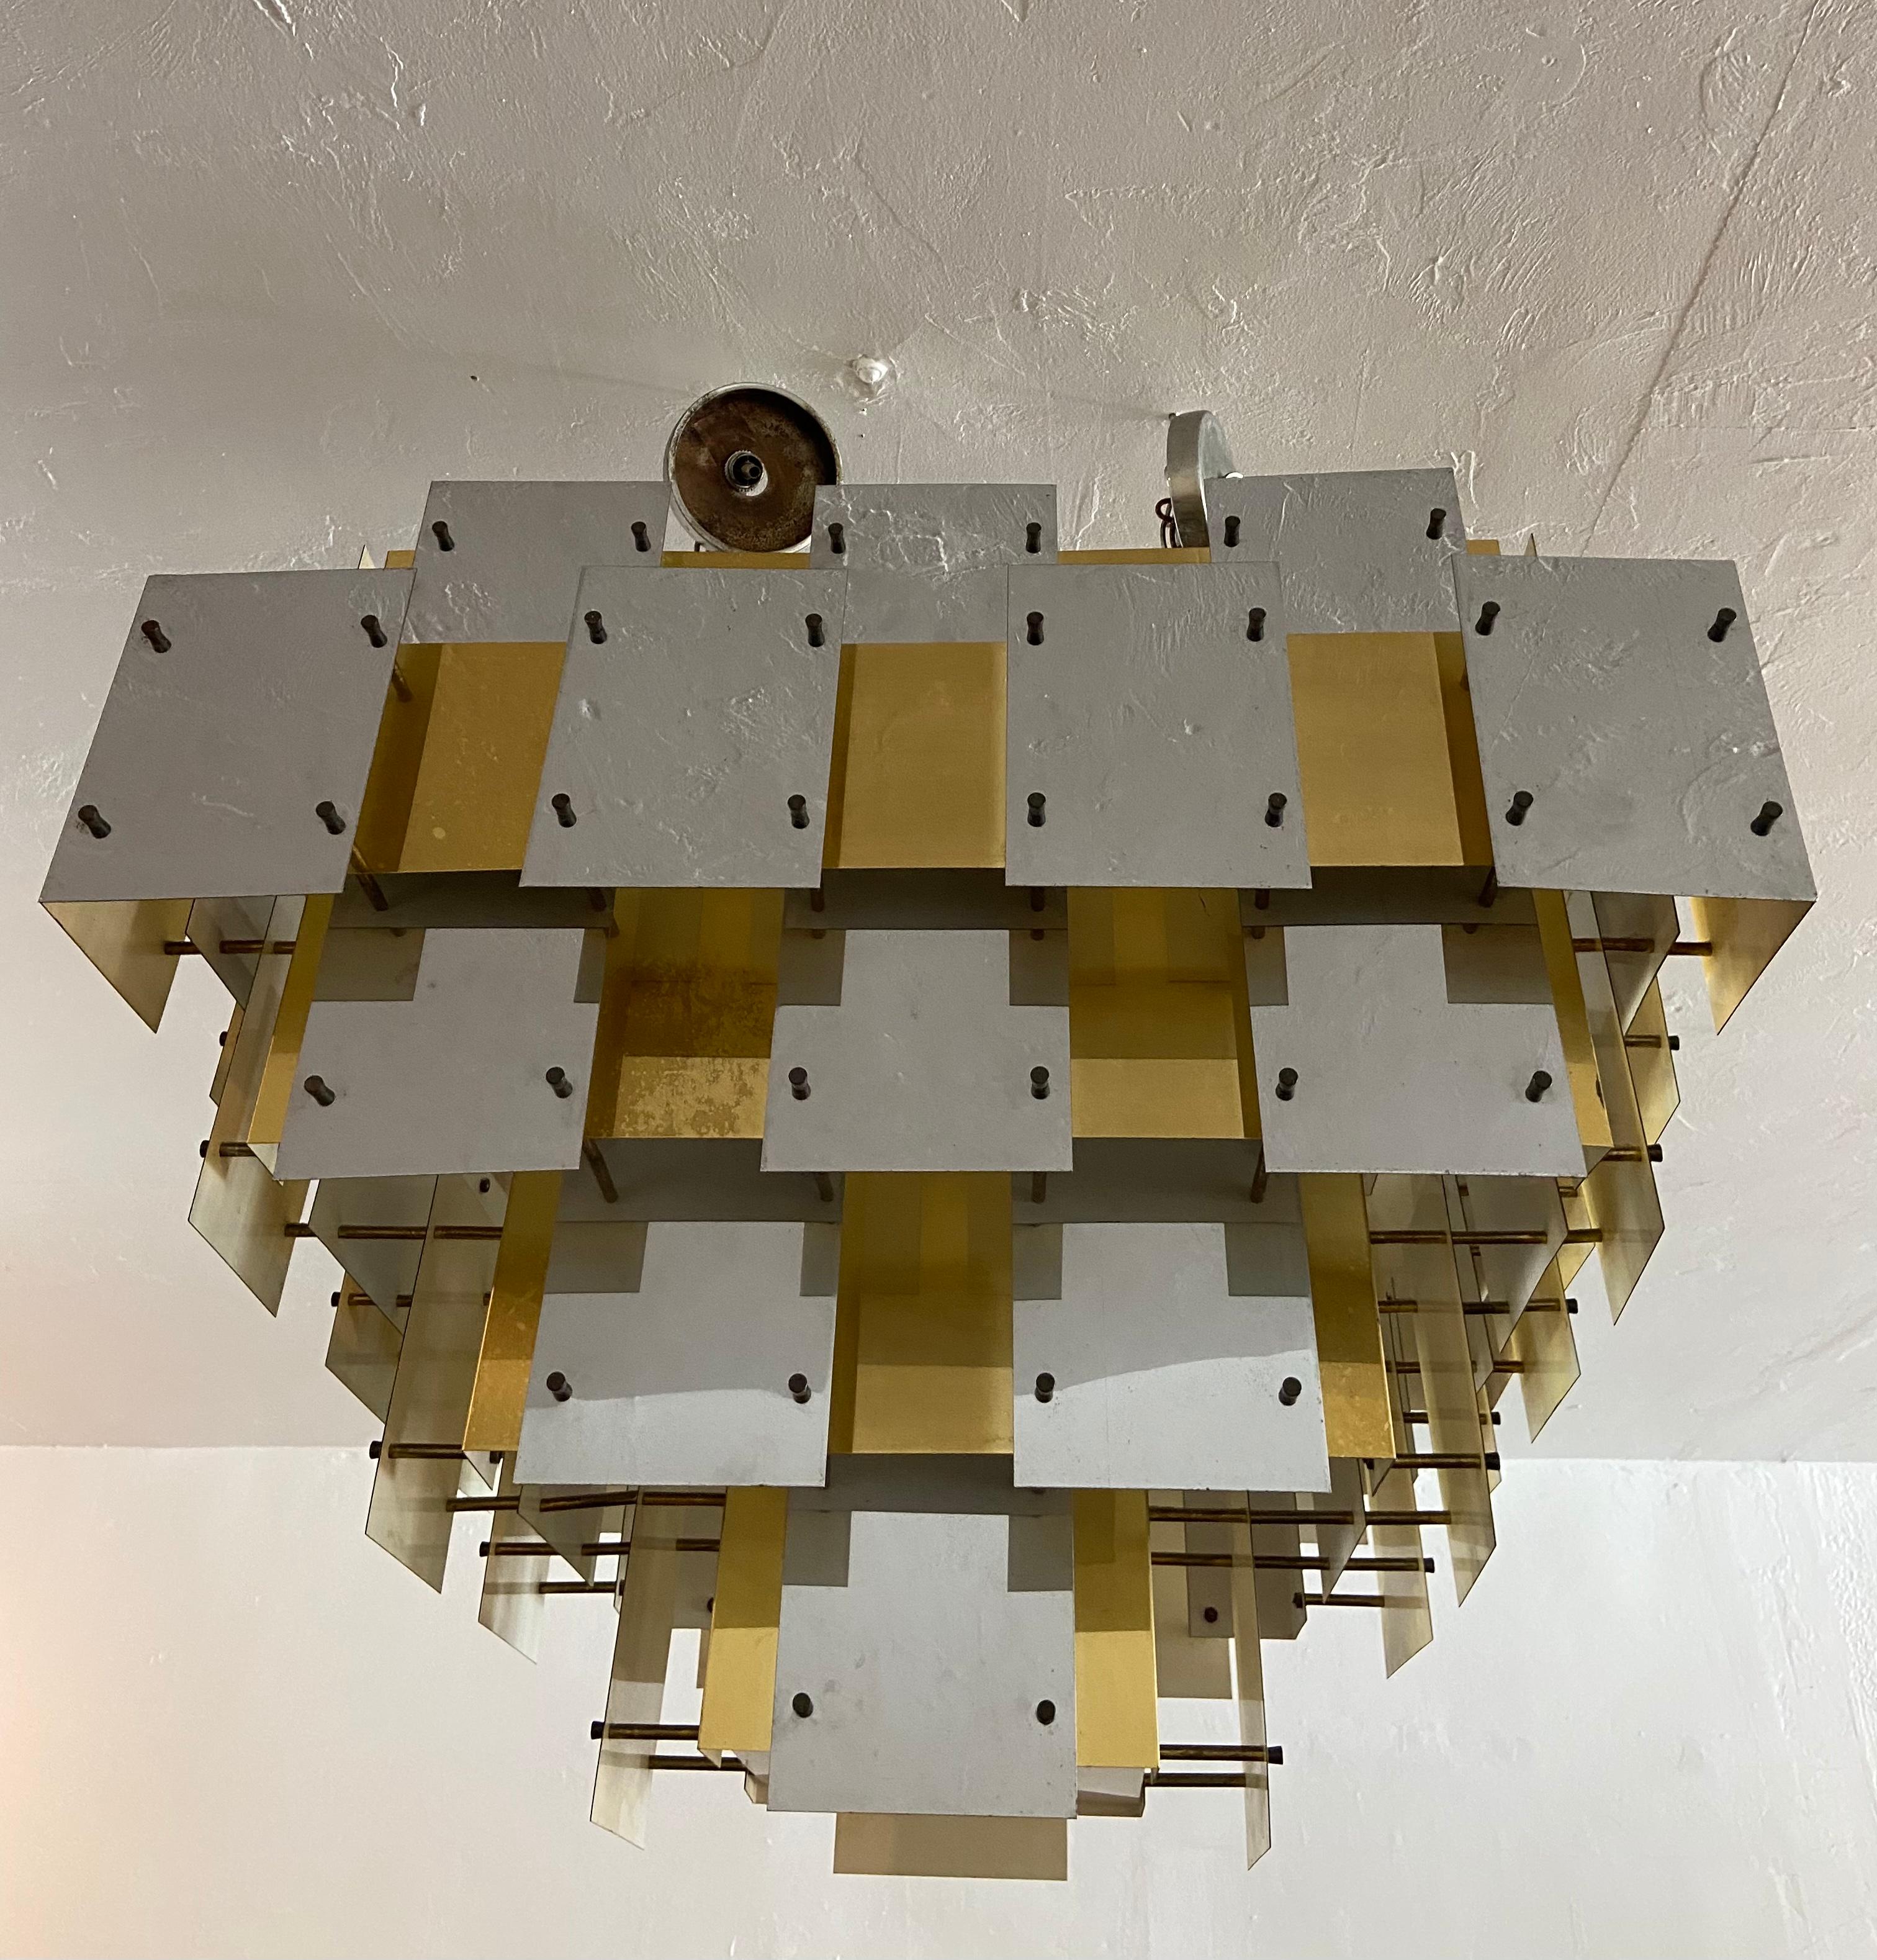 Large scale mixed metal cityscape chandelier by Robert Sonneman. Rare example consisting of alternating brass and polished aluminum plates bound by brass rods and screw in ends. 3 bulb system. Patina to the metal plates consistent with age and